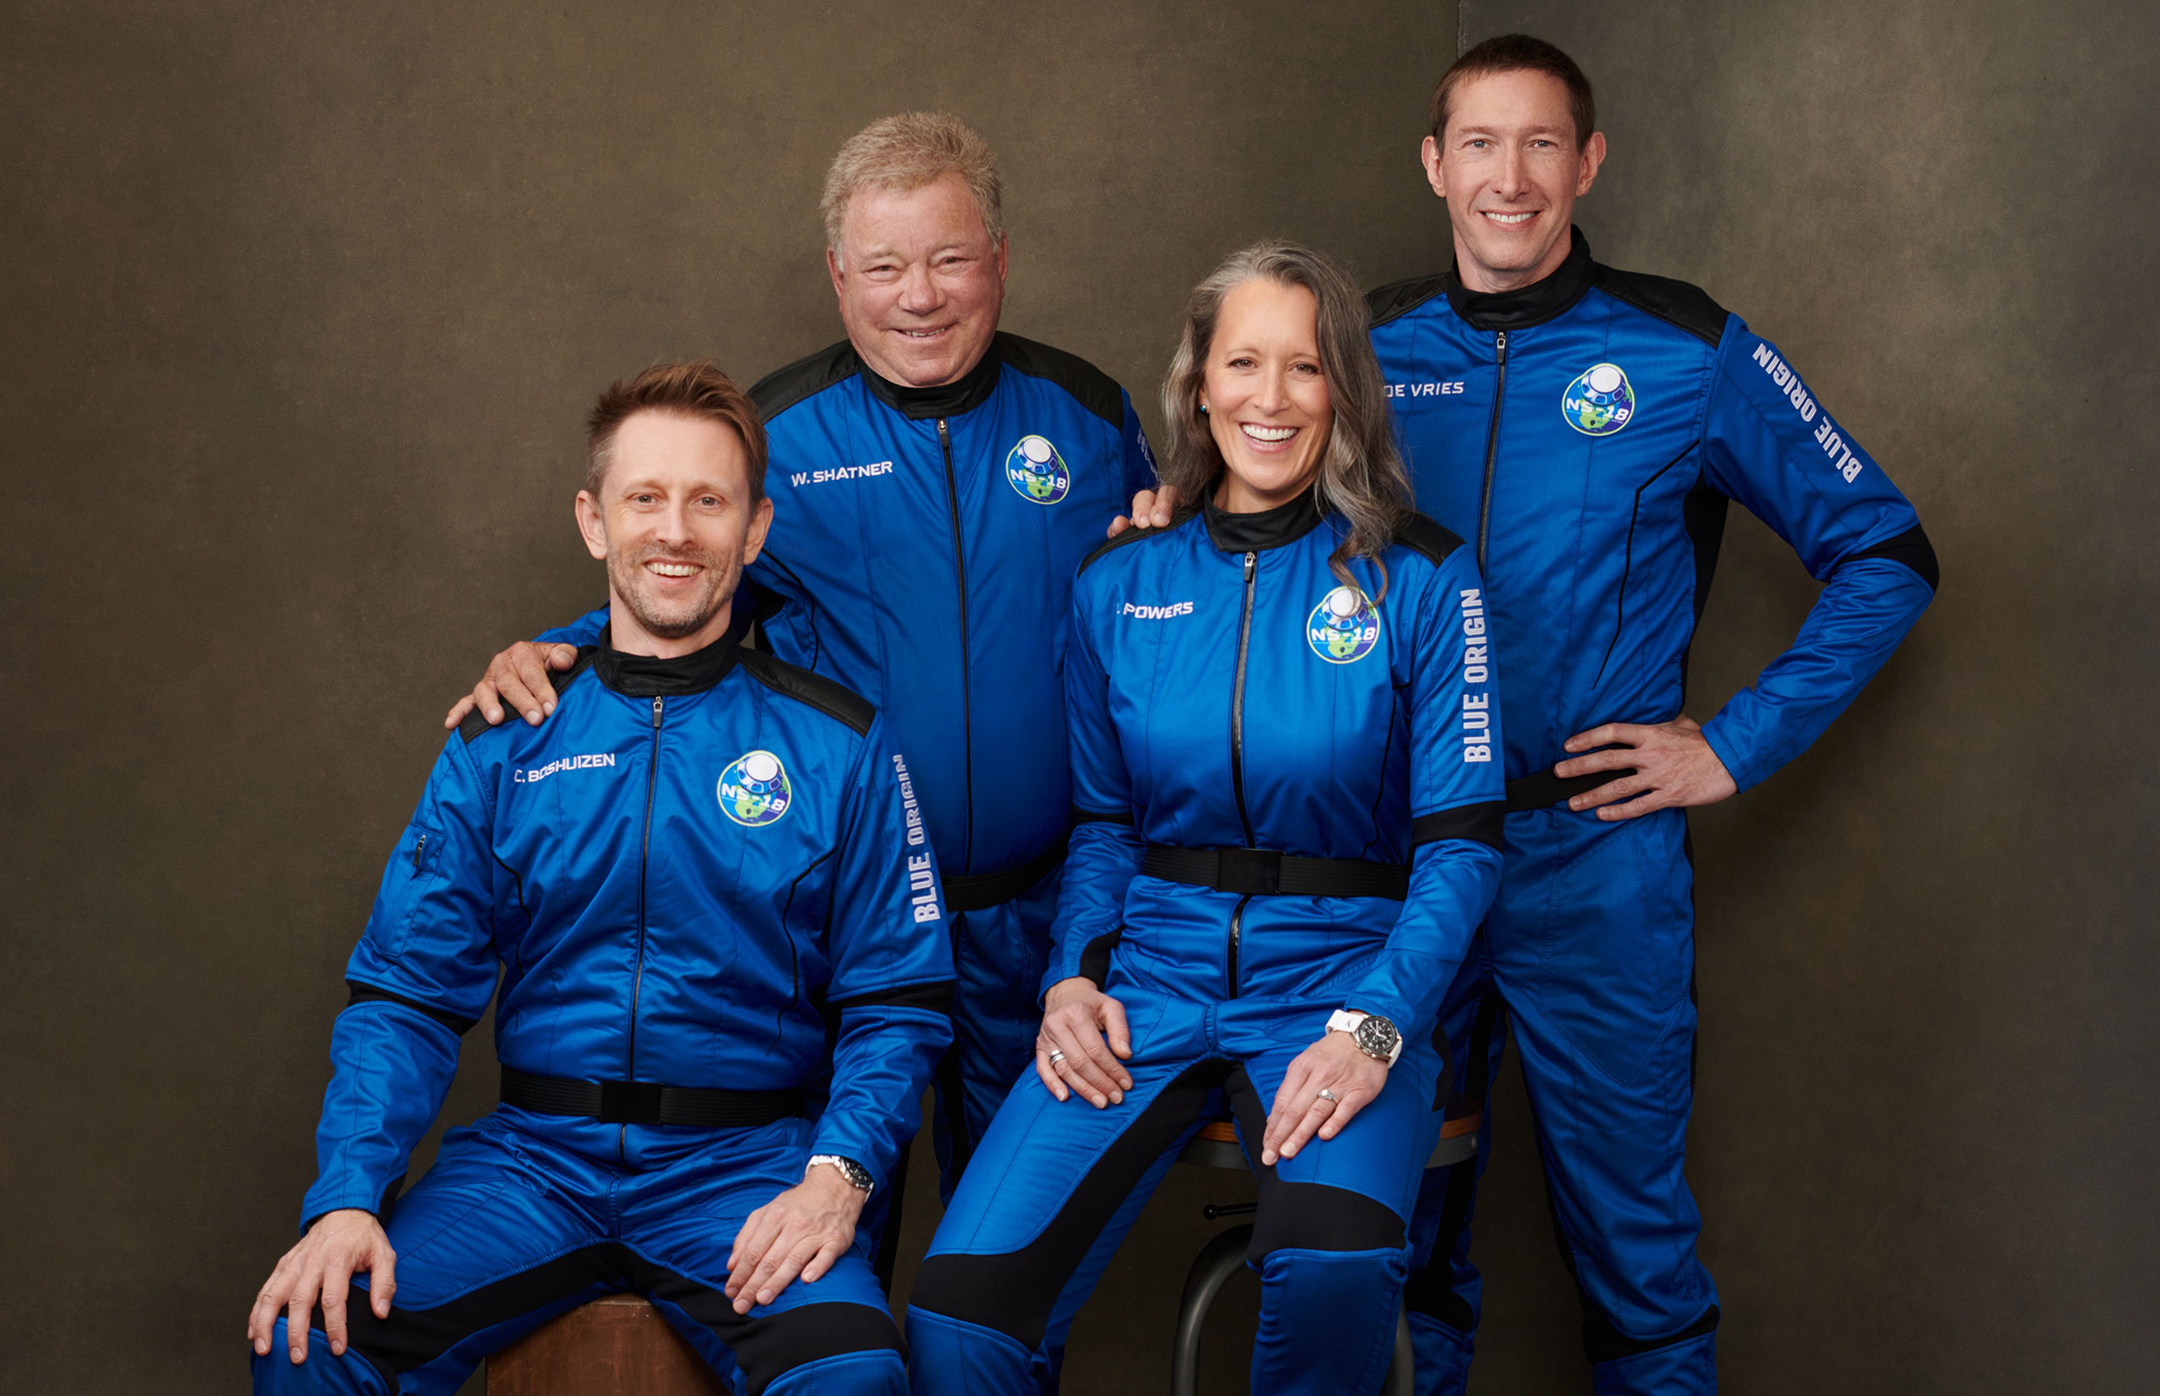 Four people in blue and black jumpsuits pose for a photograph